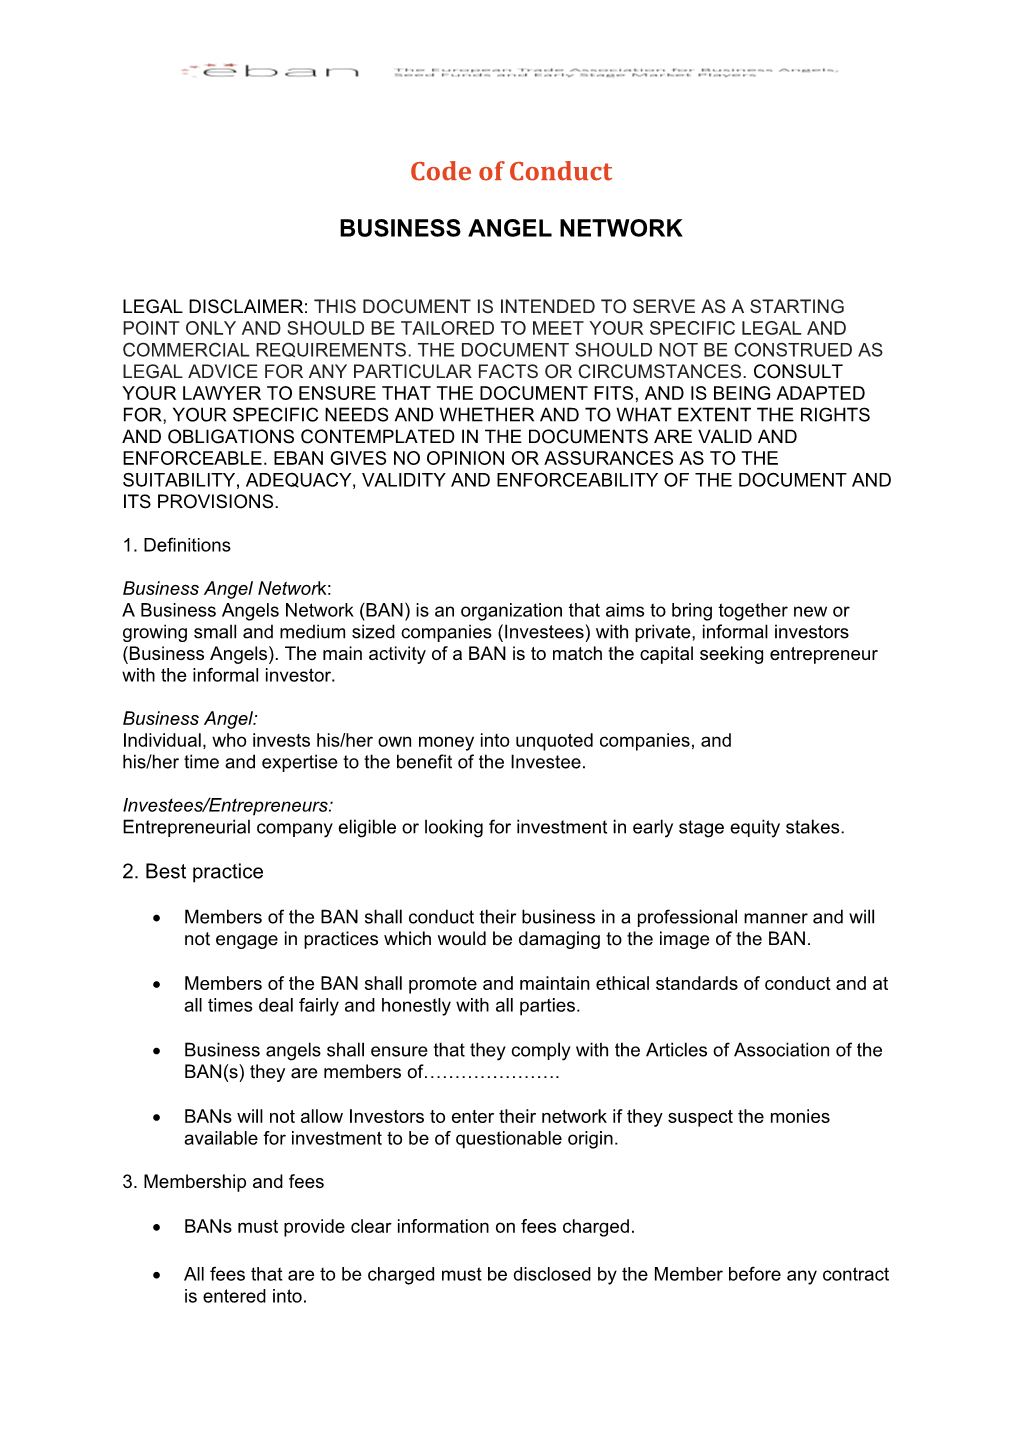 Business Angel Network